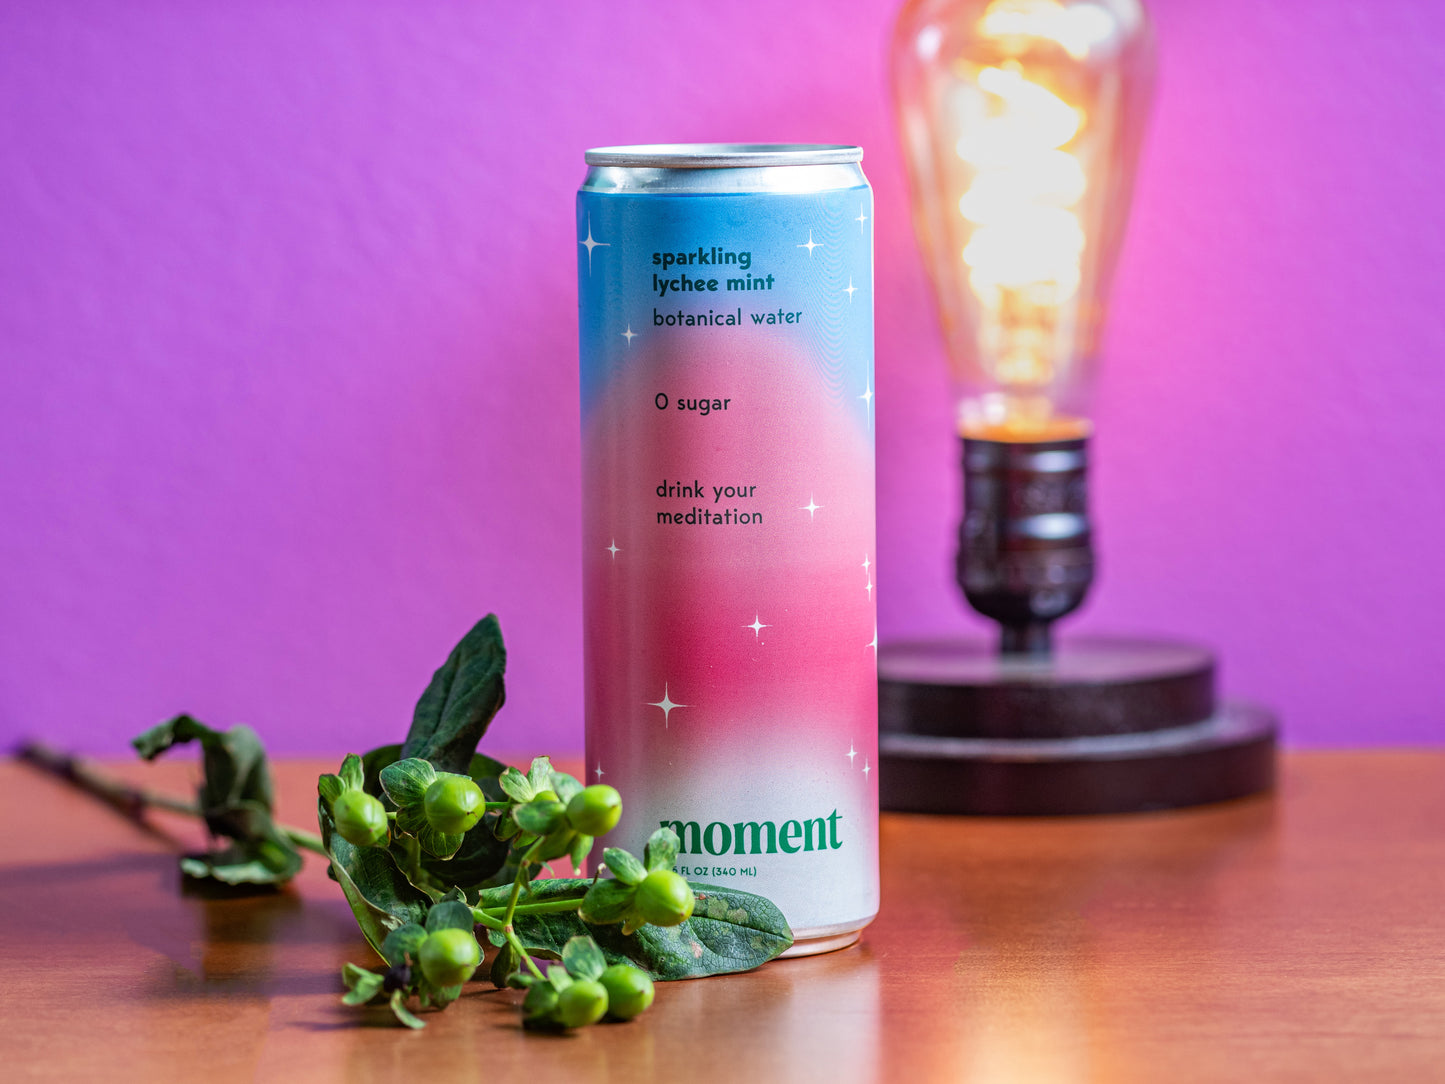 a can of moment's sparkling lychee mint botanical water